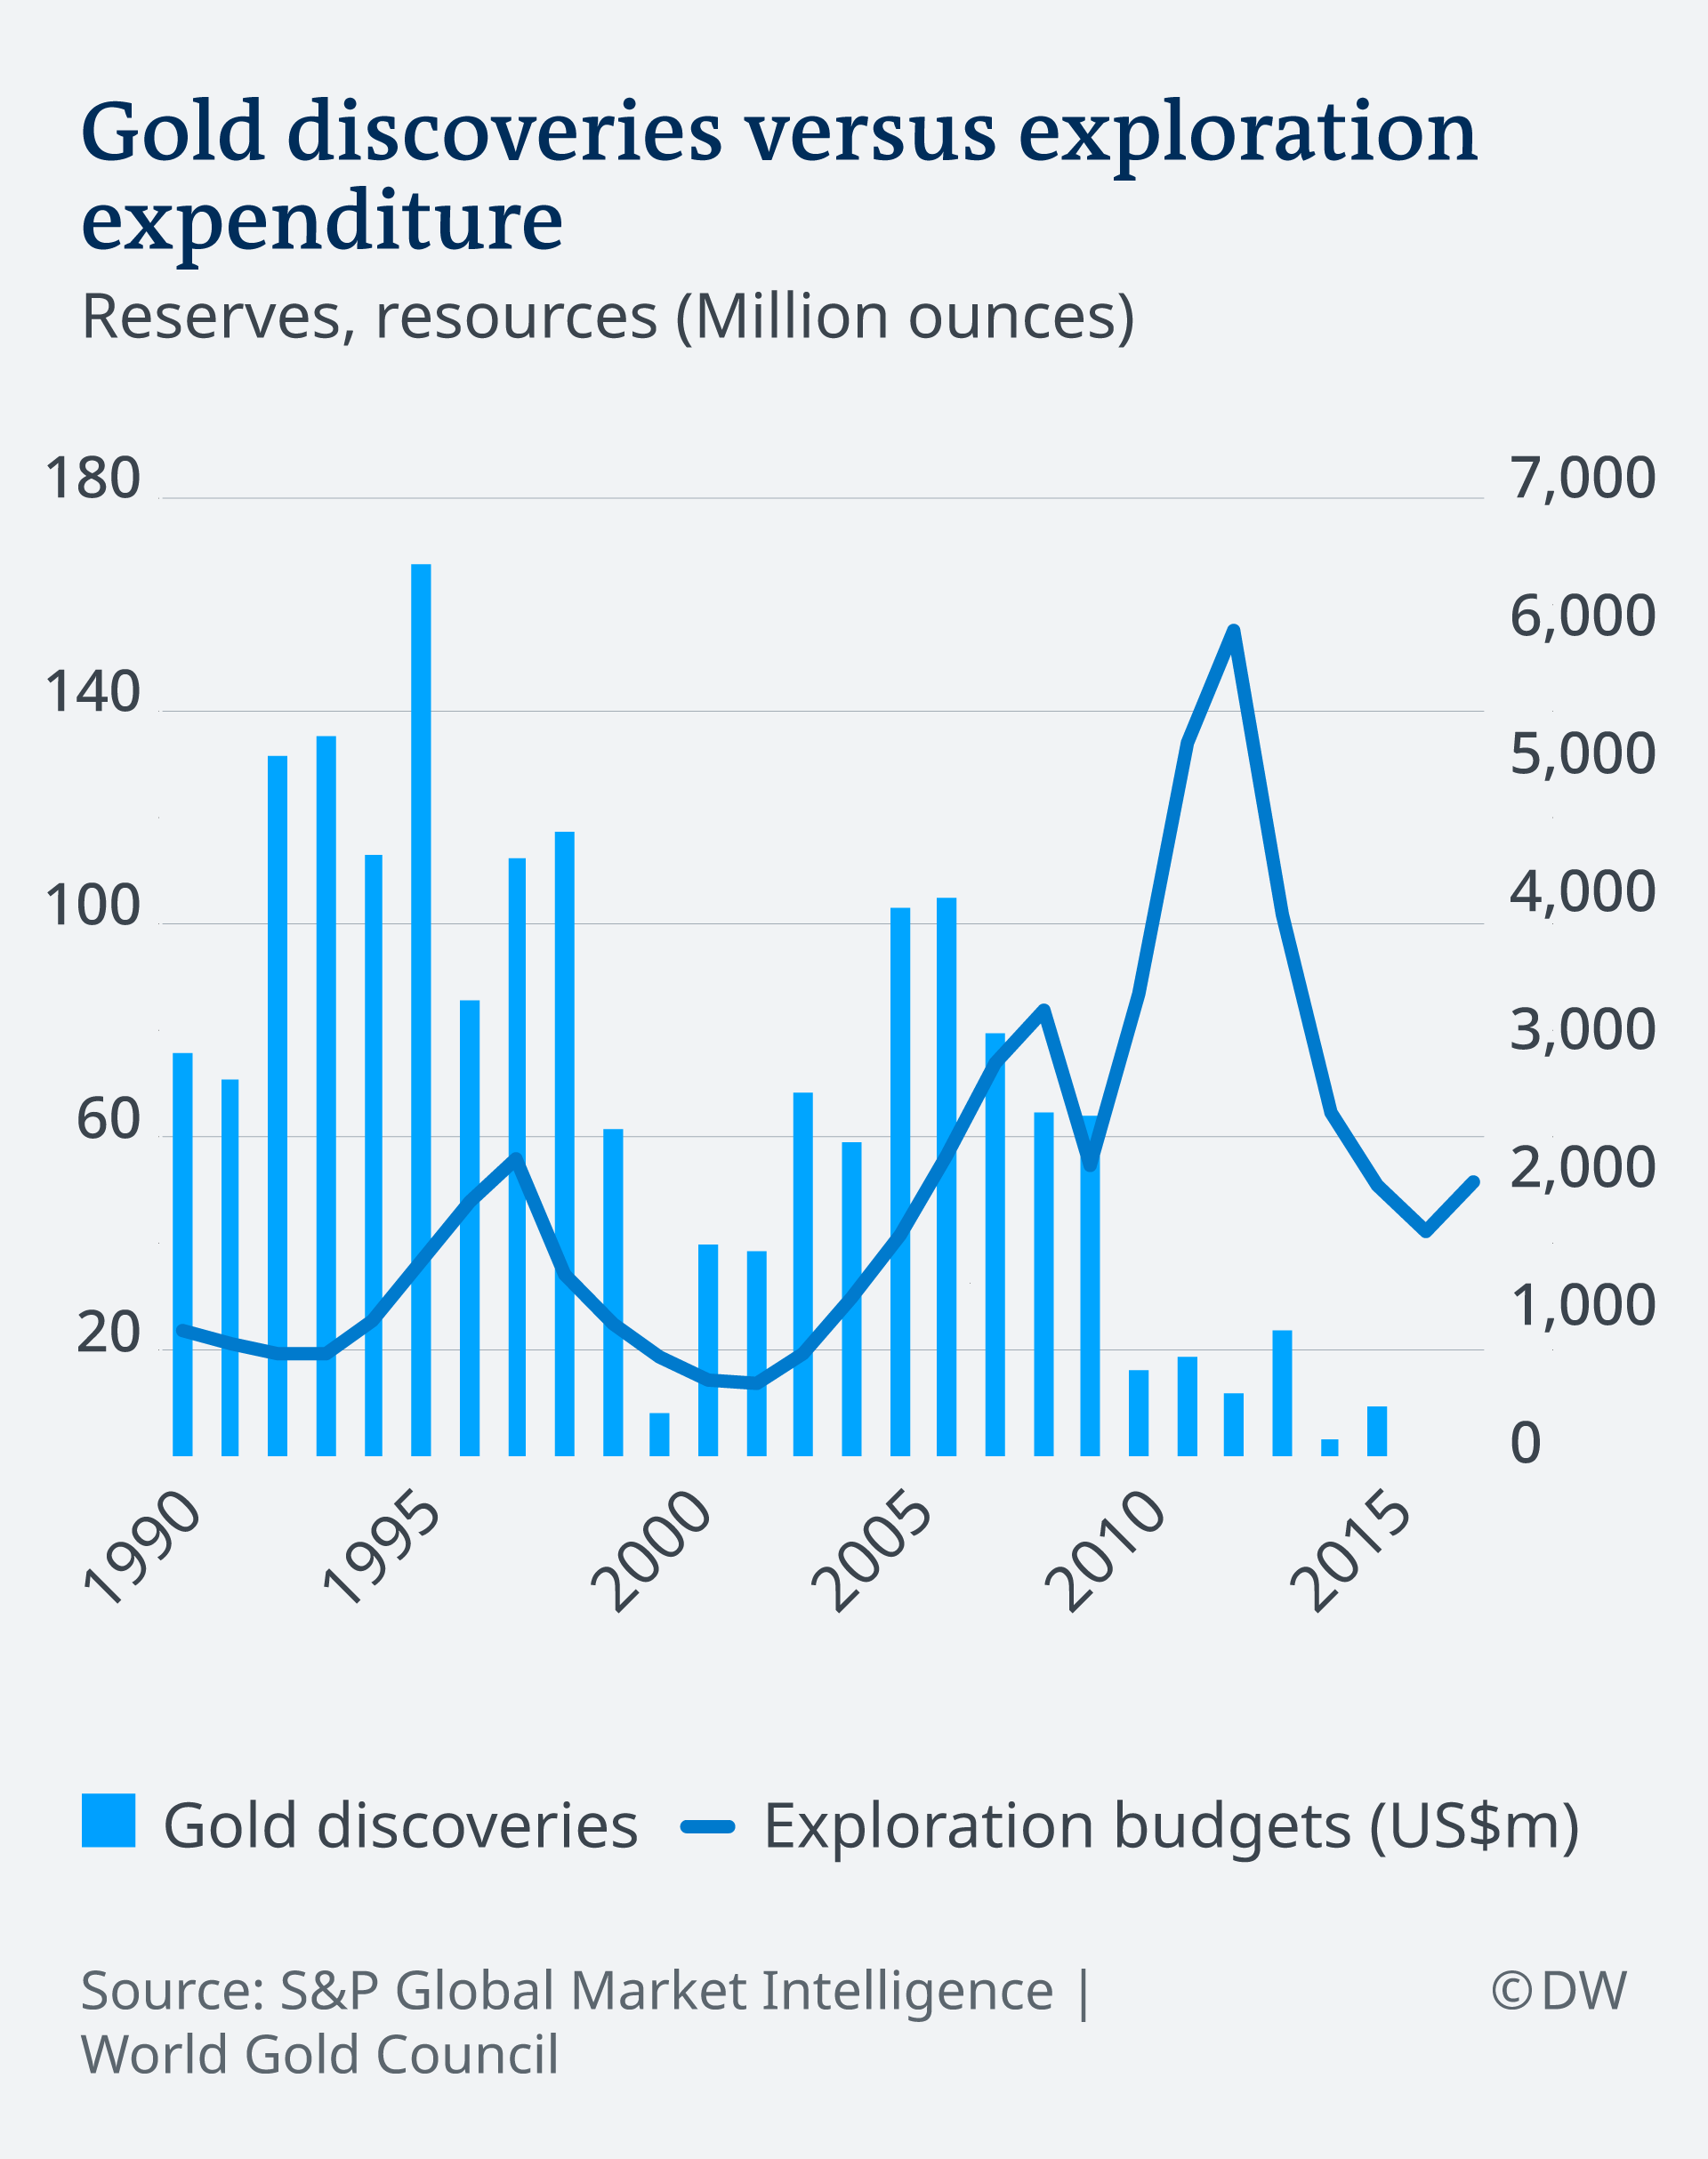 An infographic showing the relationship between gold deposit discoveries and exploration budgets